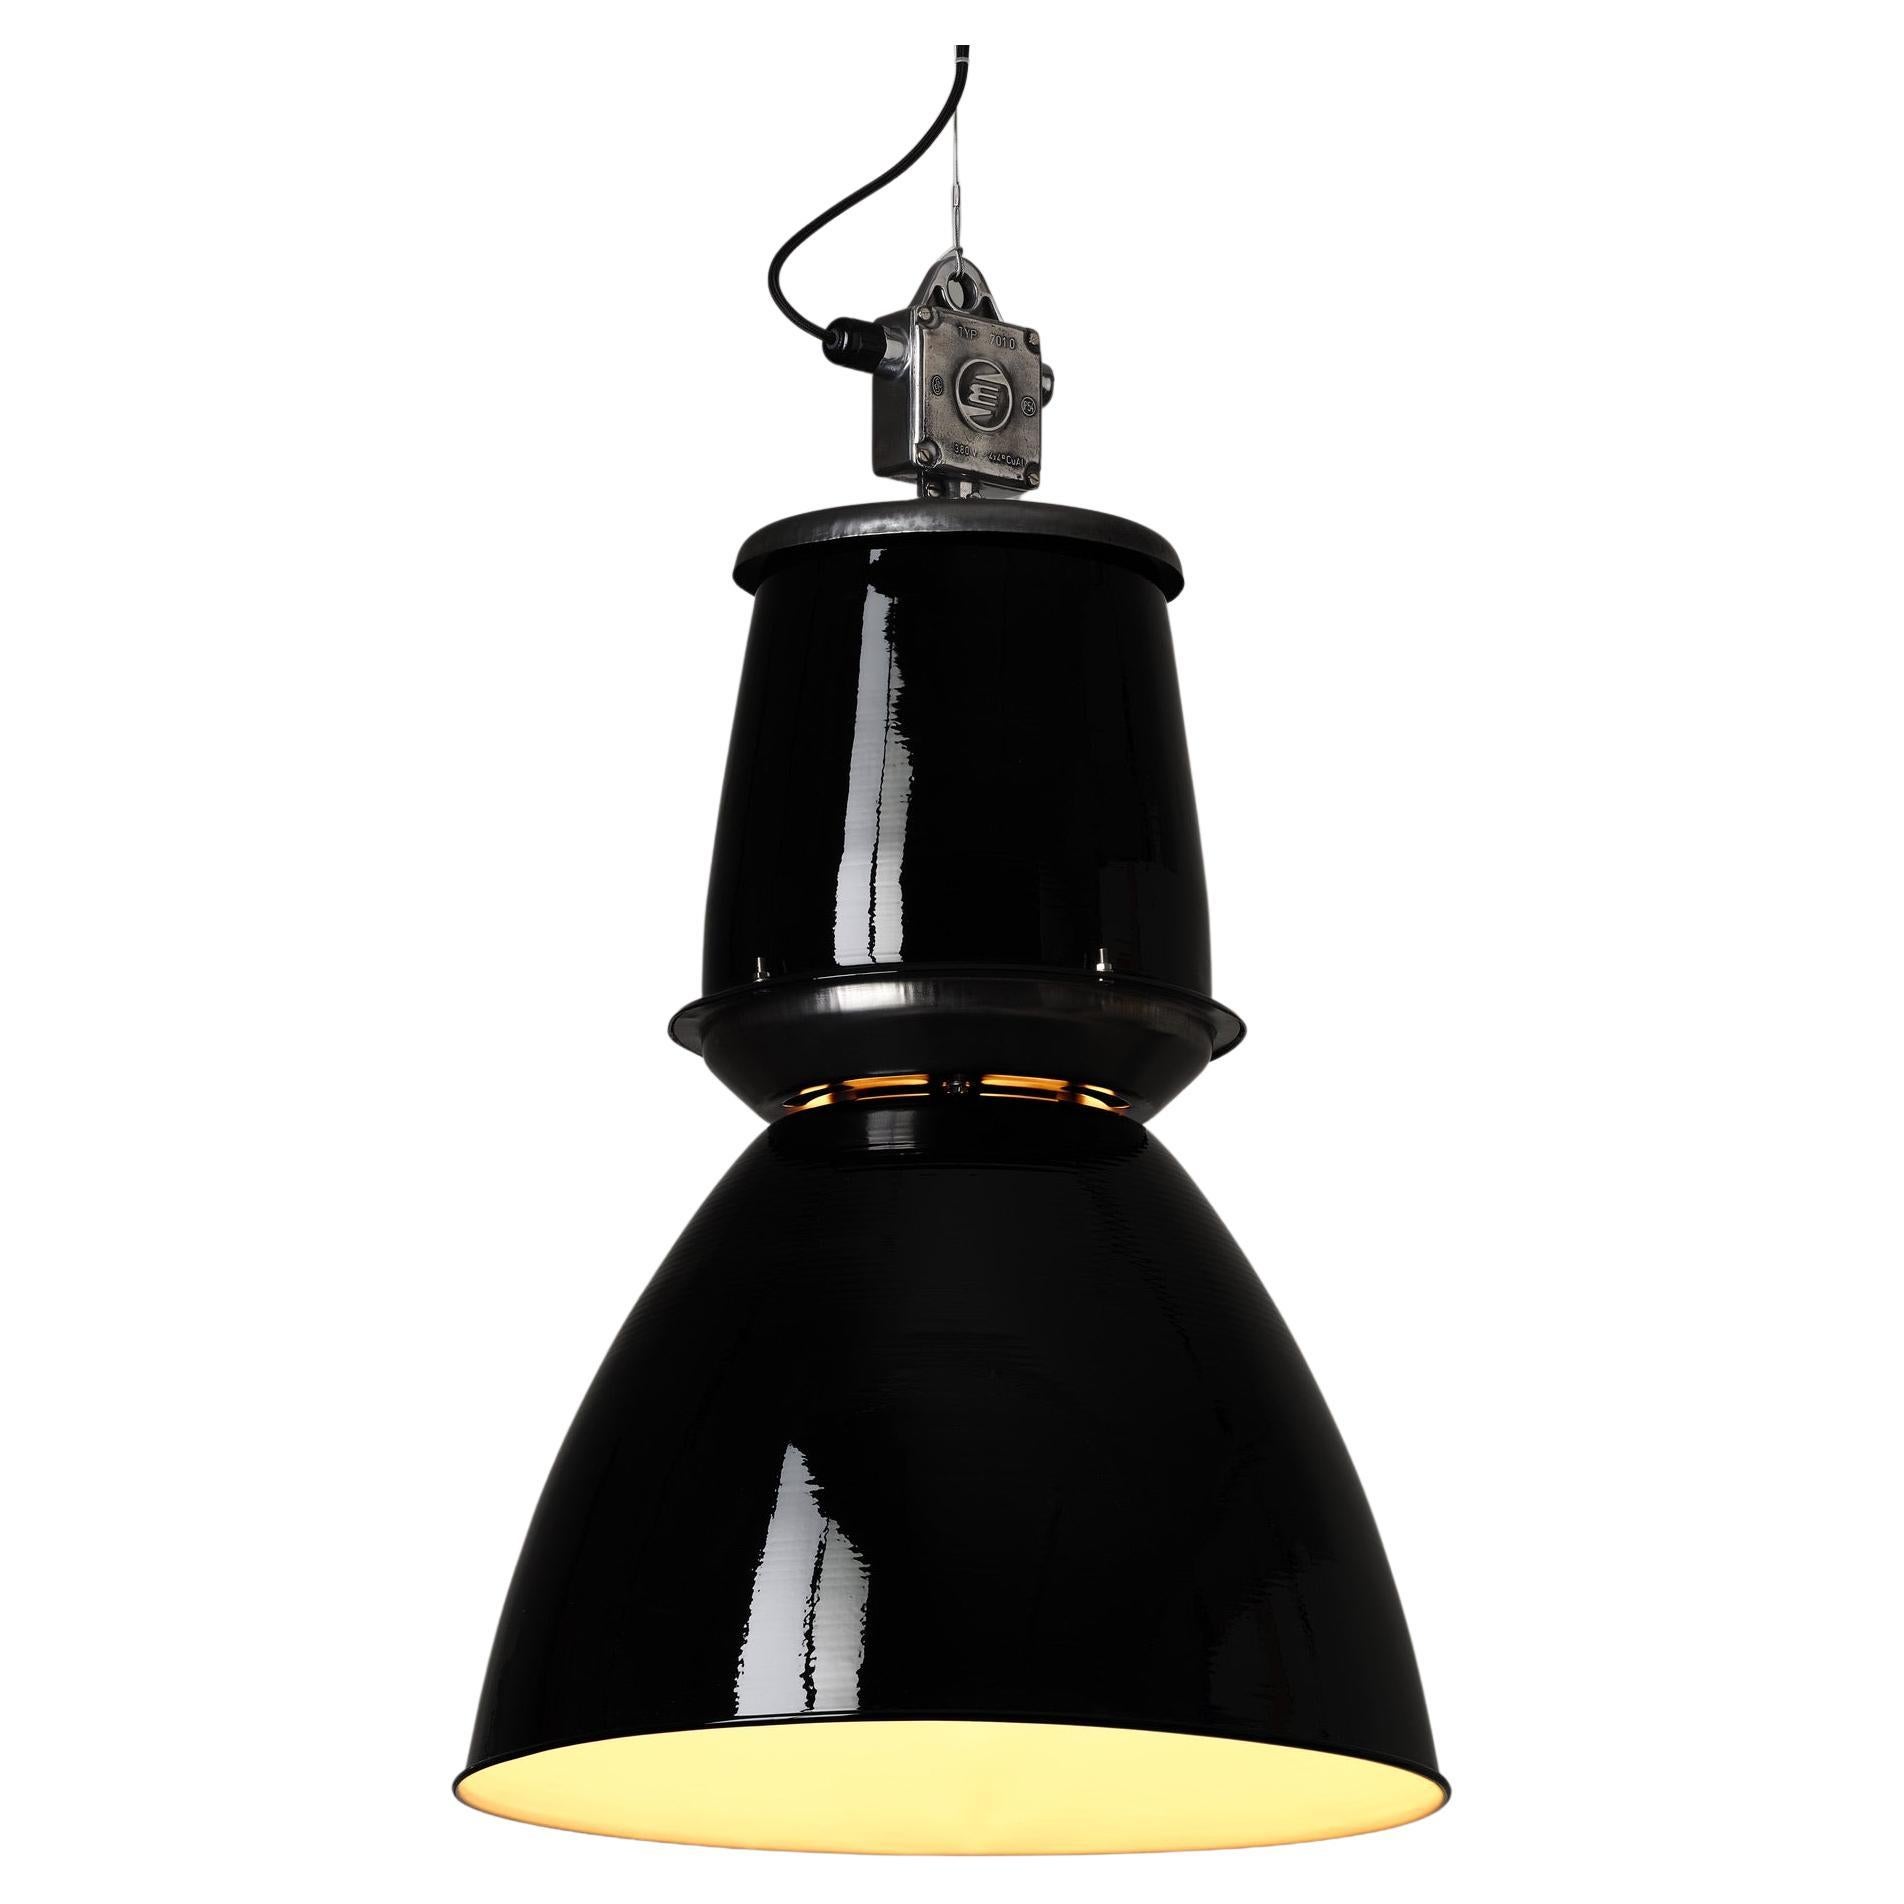 Vintage Giant Czech Pendant Light - Reconditioned Black/ Grey/ White For Sale